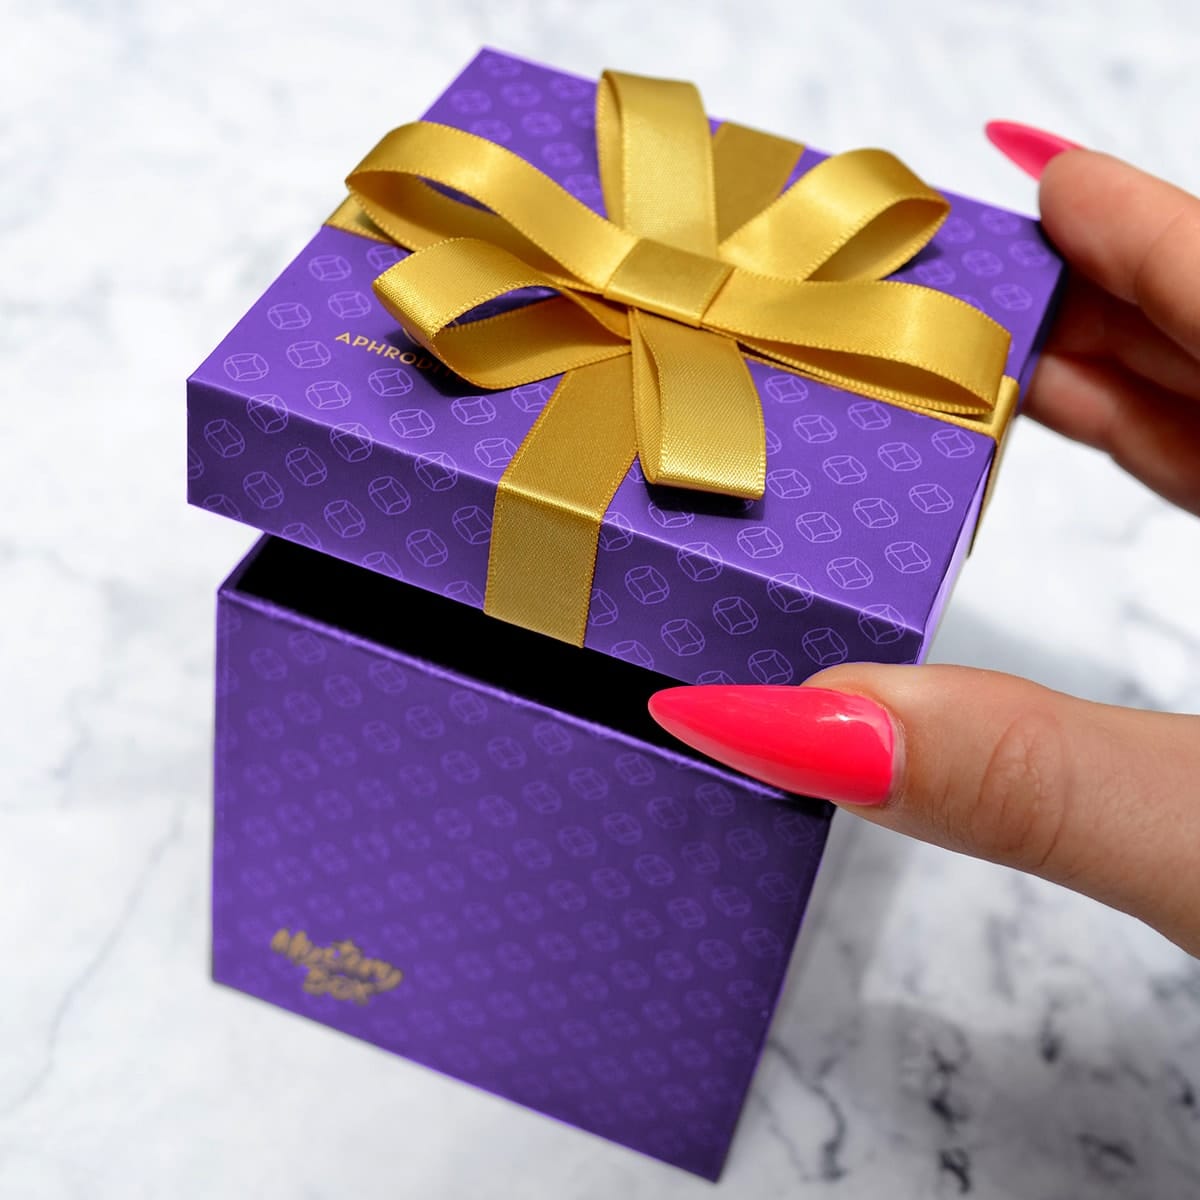 Summer Mystery Gift Box ($50 Worth of Jewelry for $24.99 )